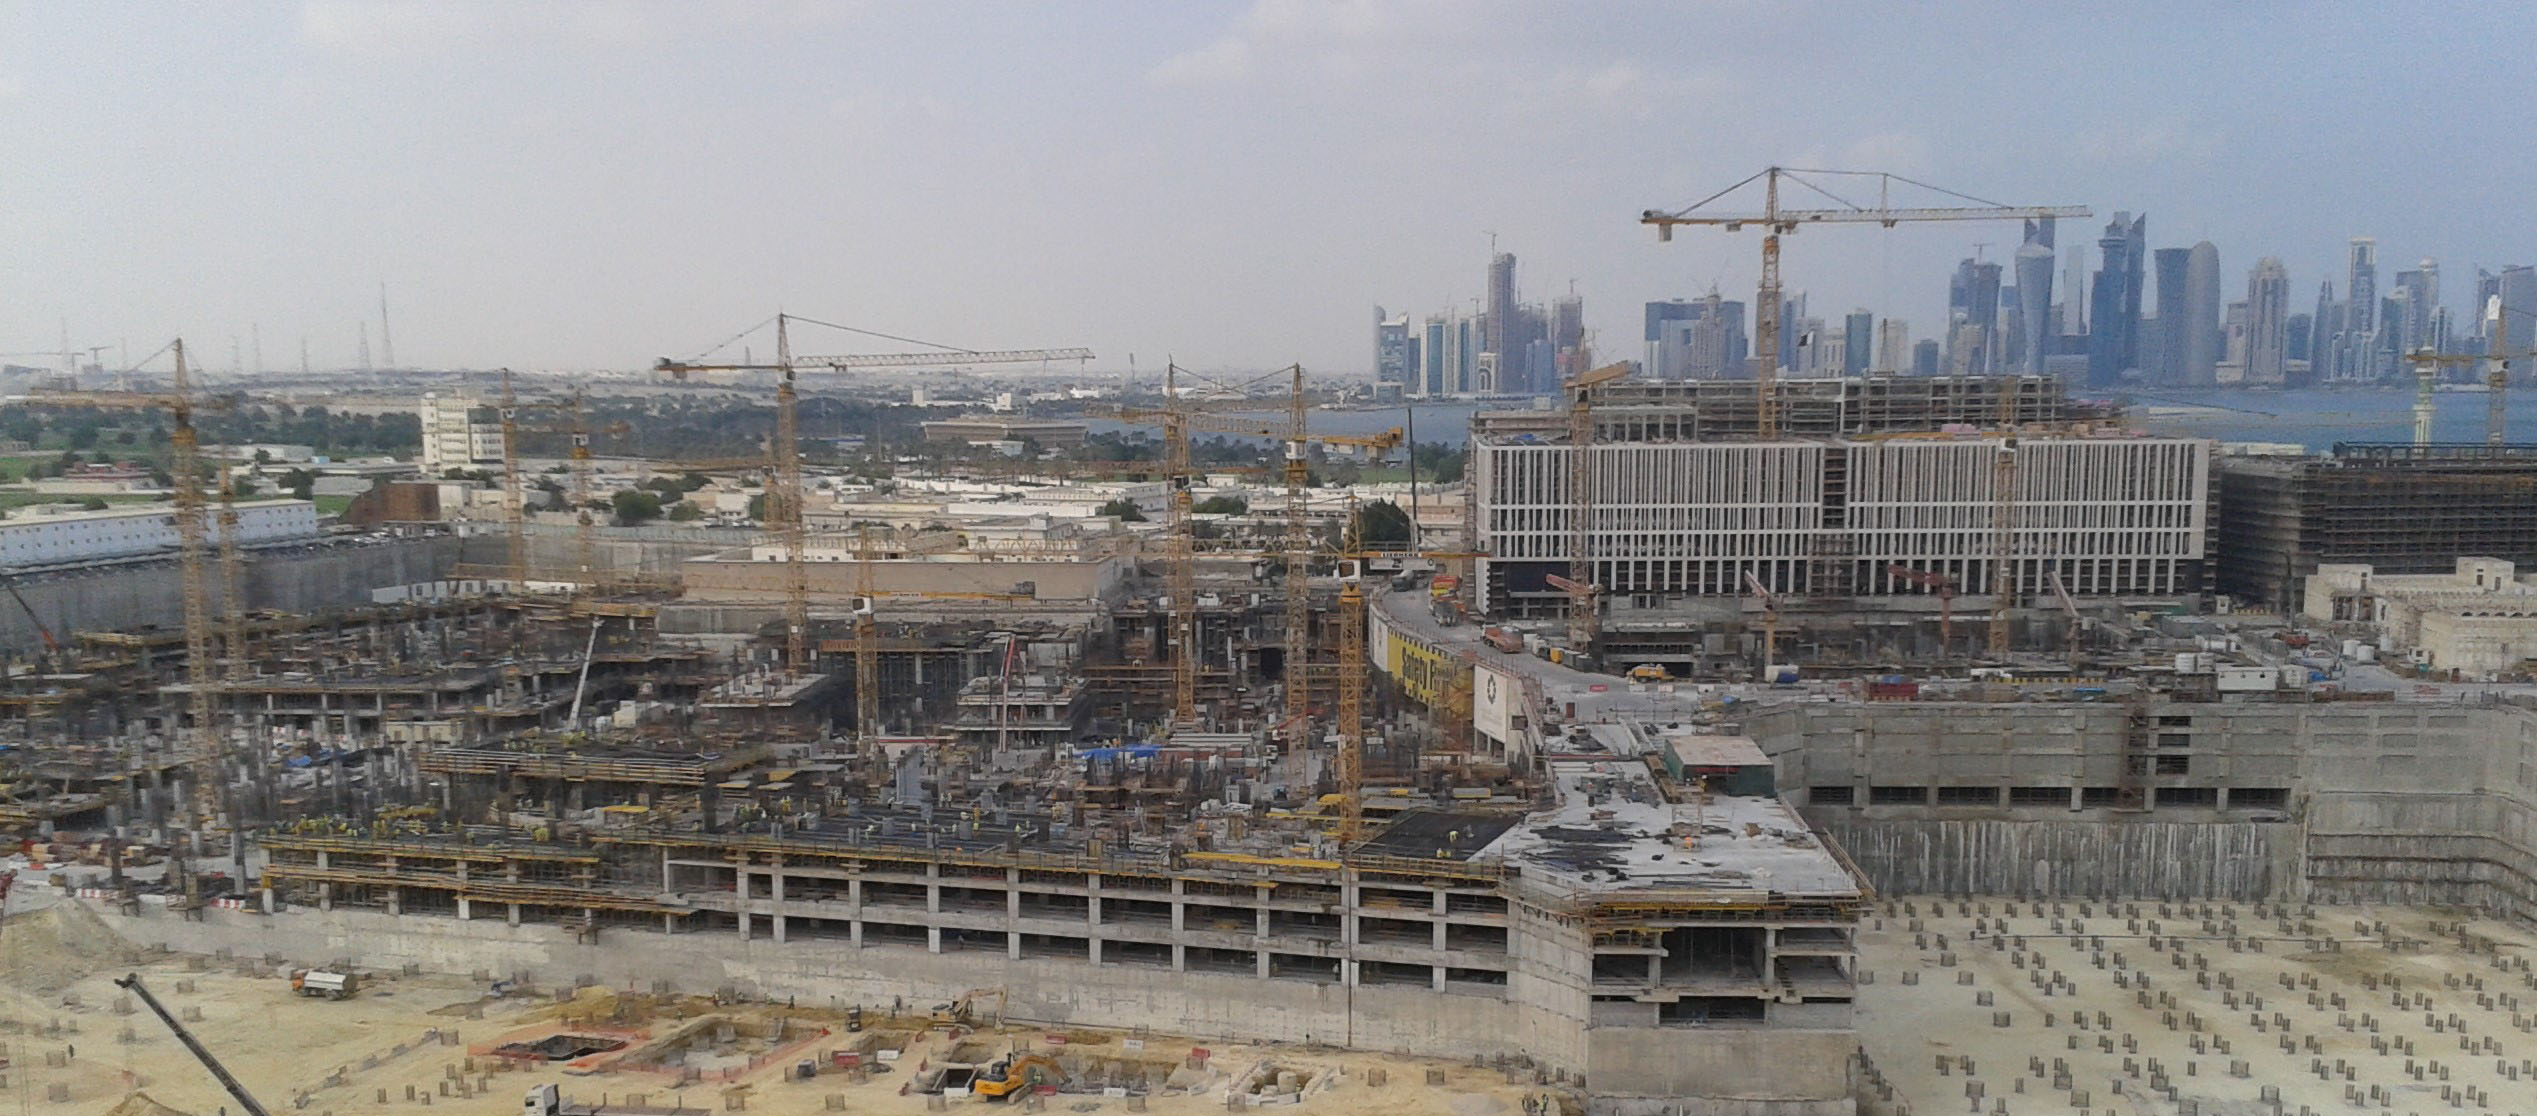 Msheireb Downtown Phase 1B